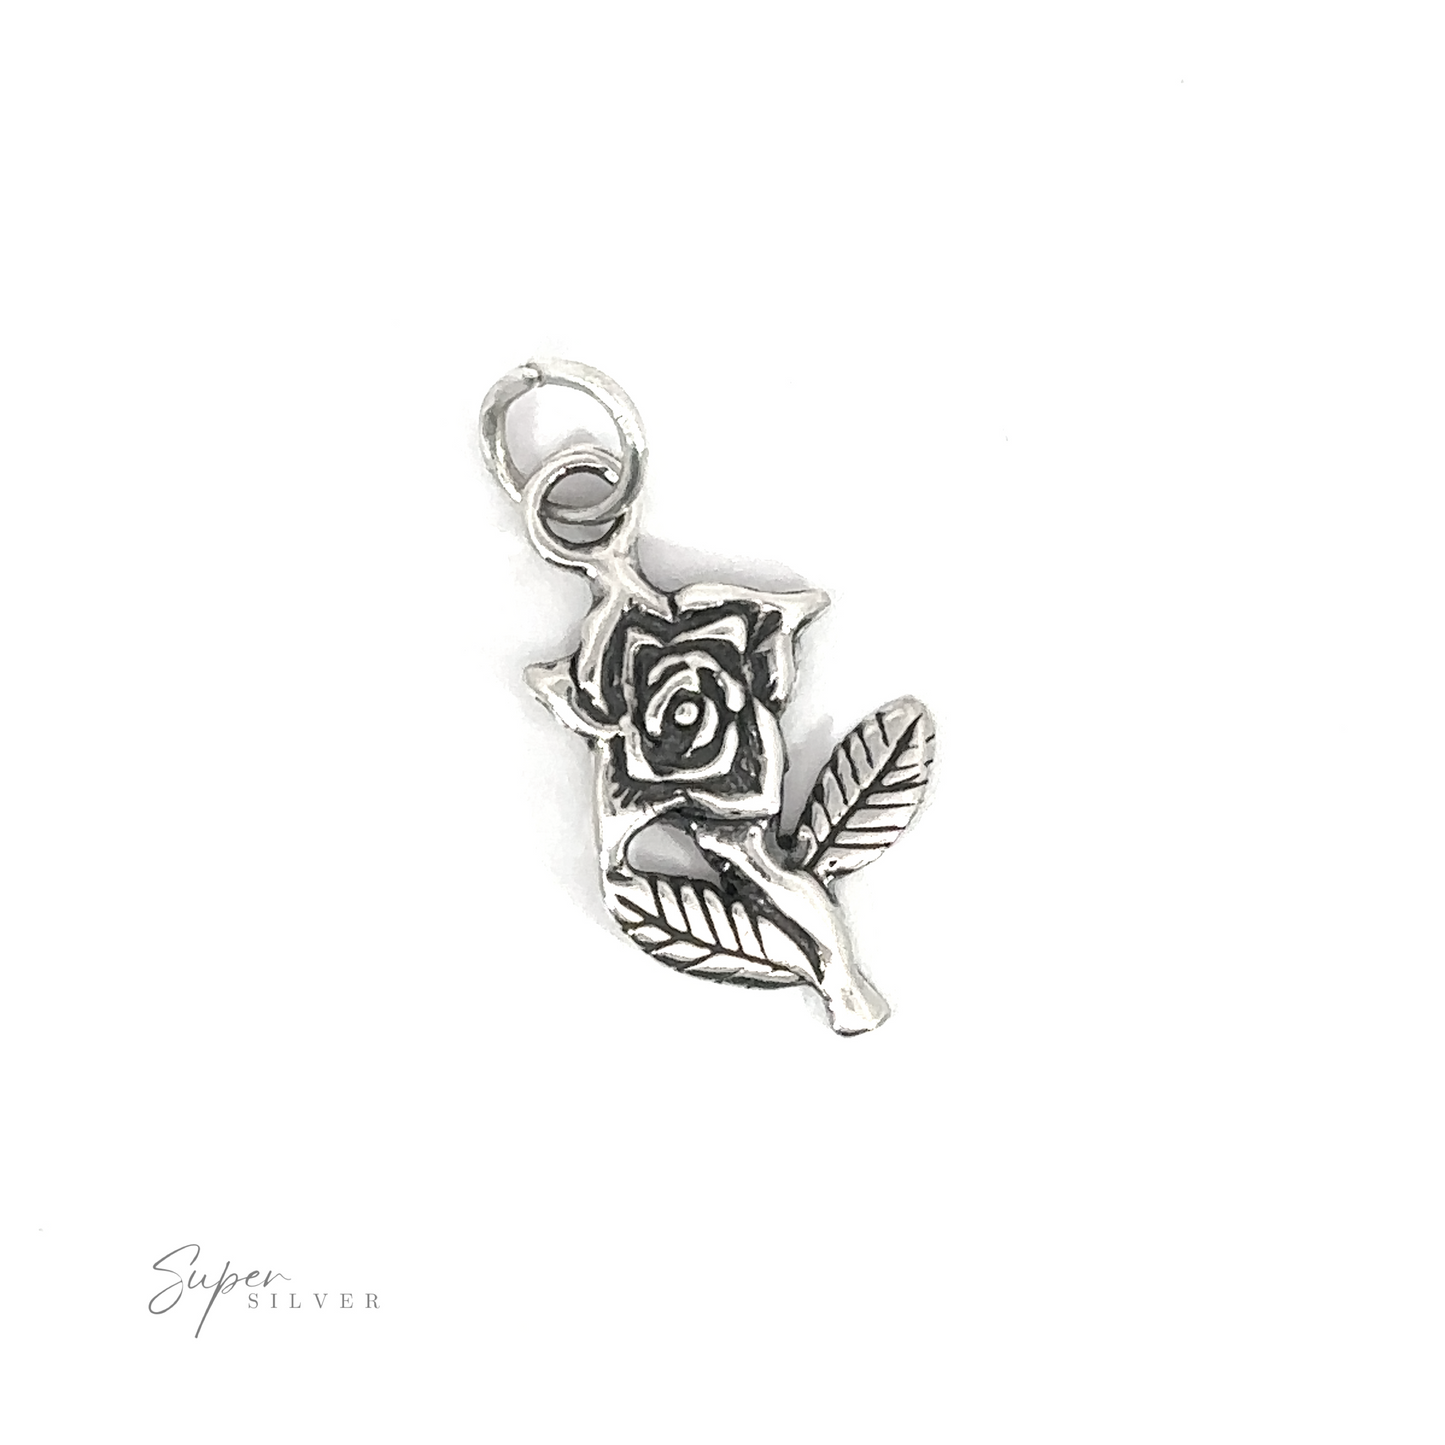 A silver Rose Charm on a white background made of .925 Sterling Silver.